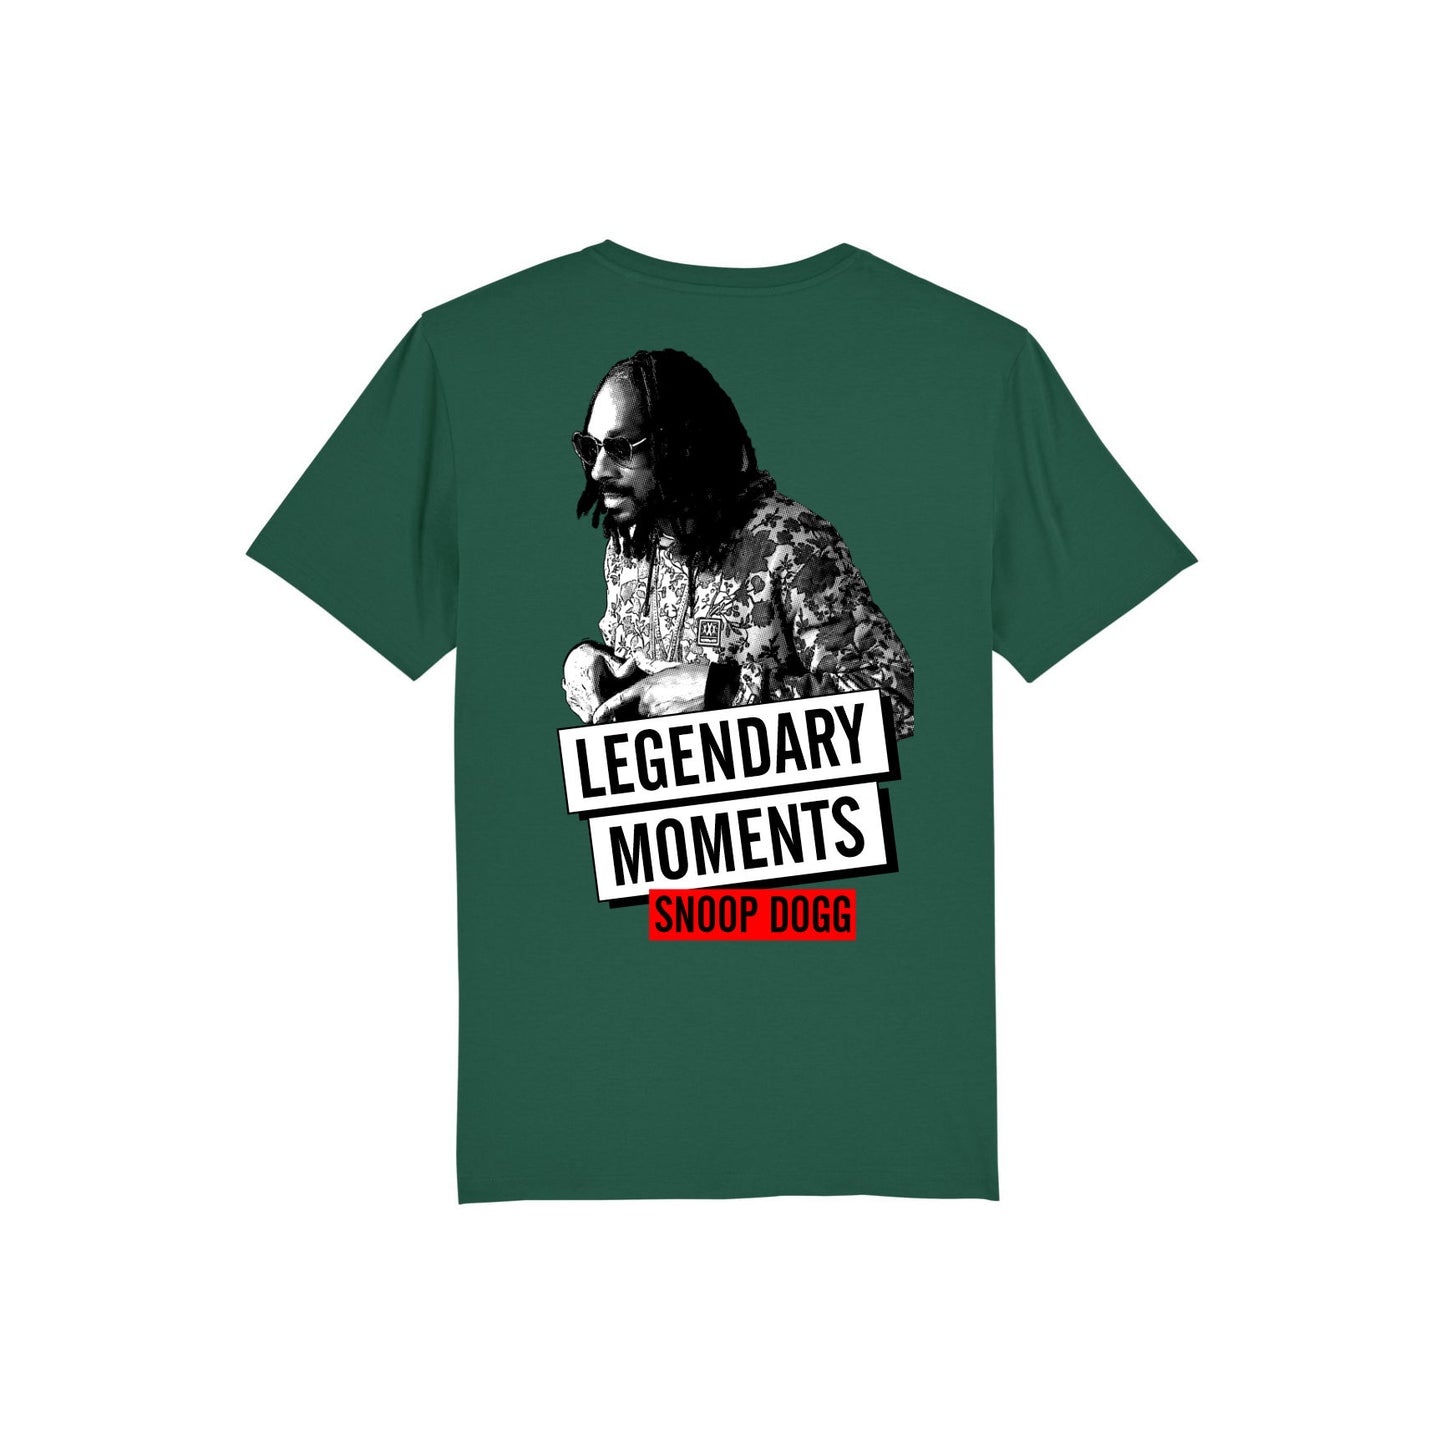 LIMITED EDITION - Legendary Moments - Snoop Dogg - Unisex T-Shirt - Green